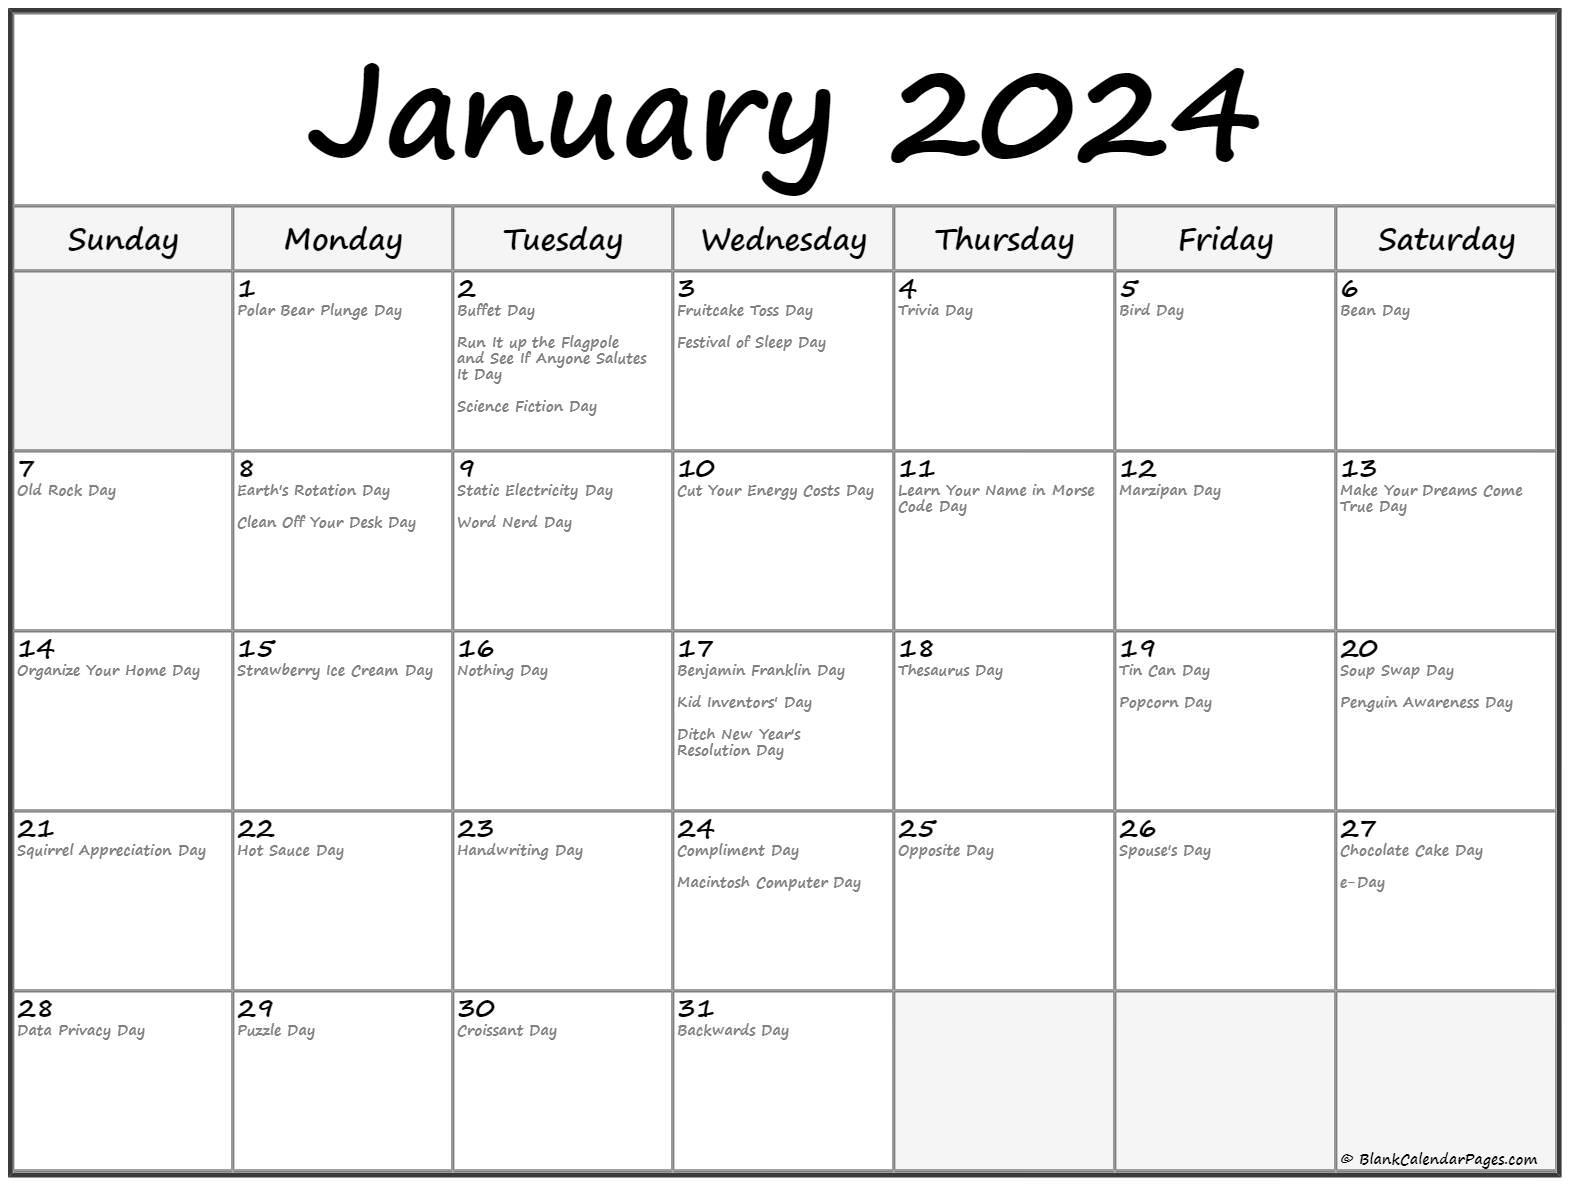 Events for January 2024